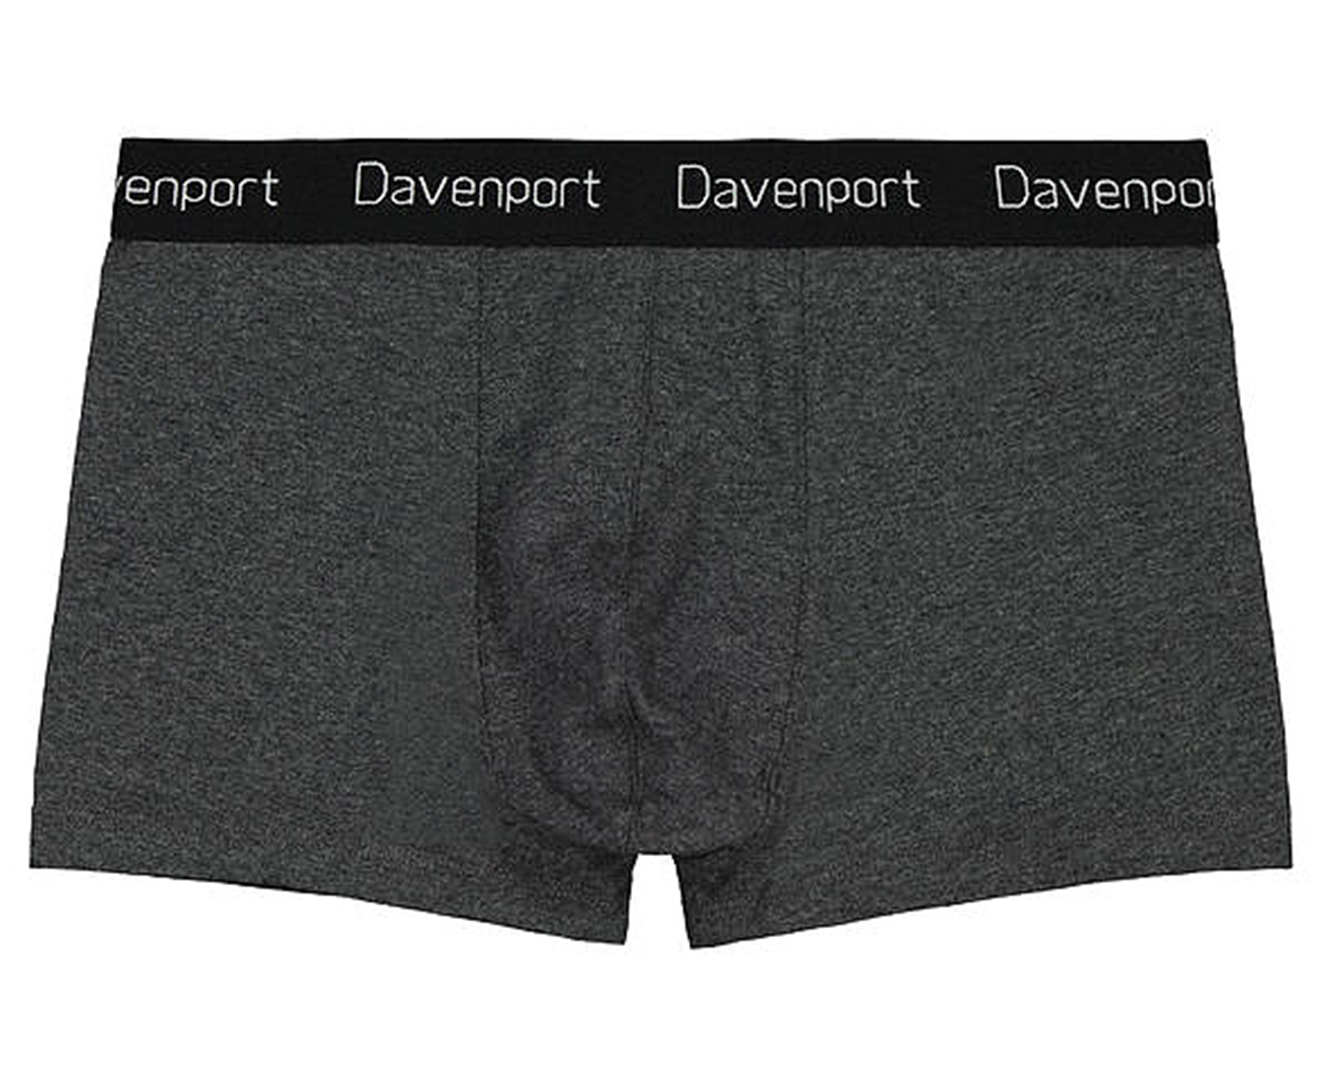 Davenport Men's Everyday Cotton Trunks - Charcoal Marle | Catch.co.nz